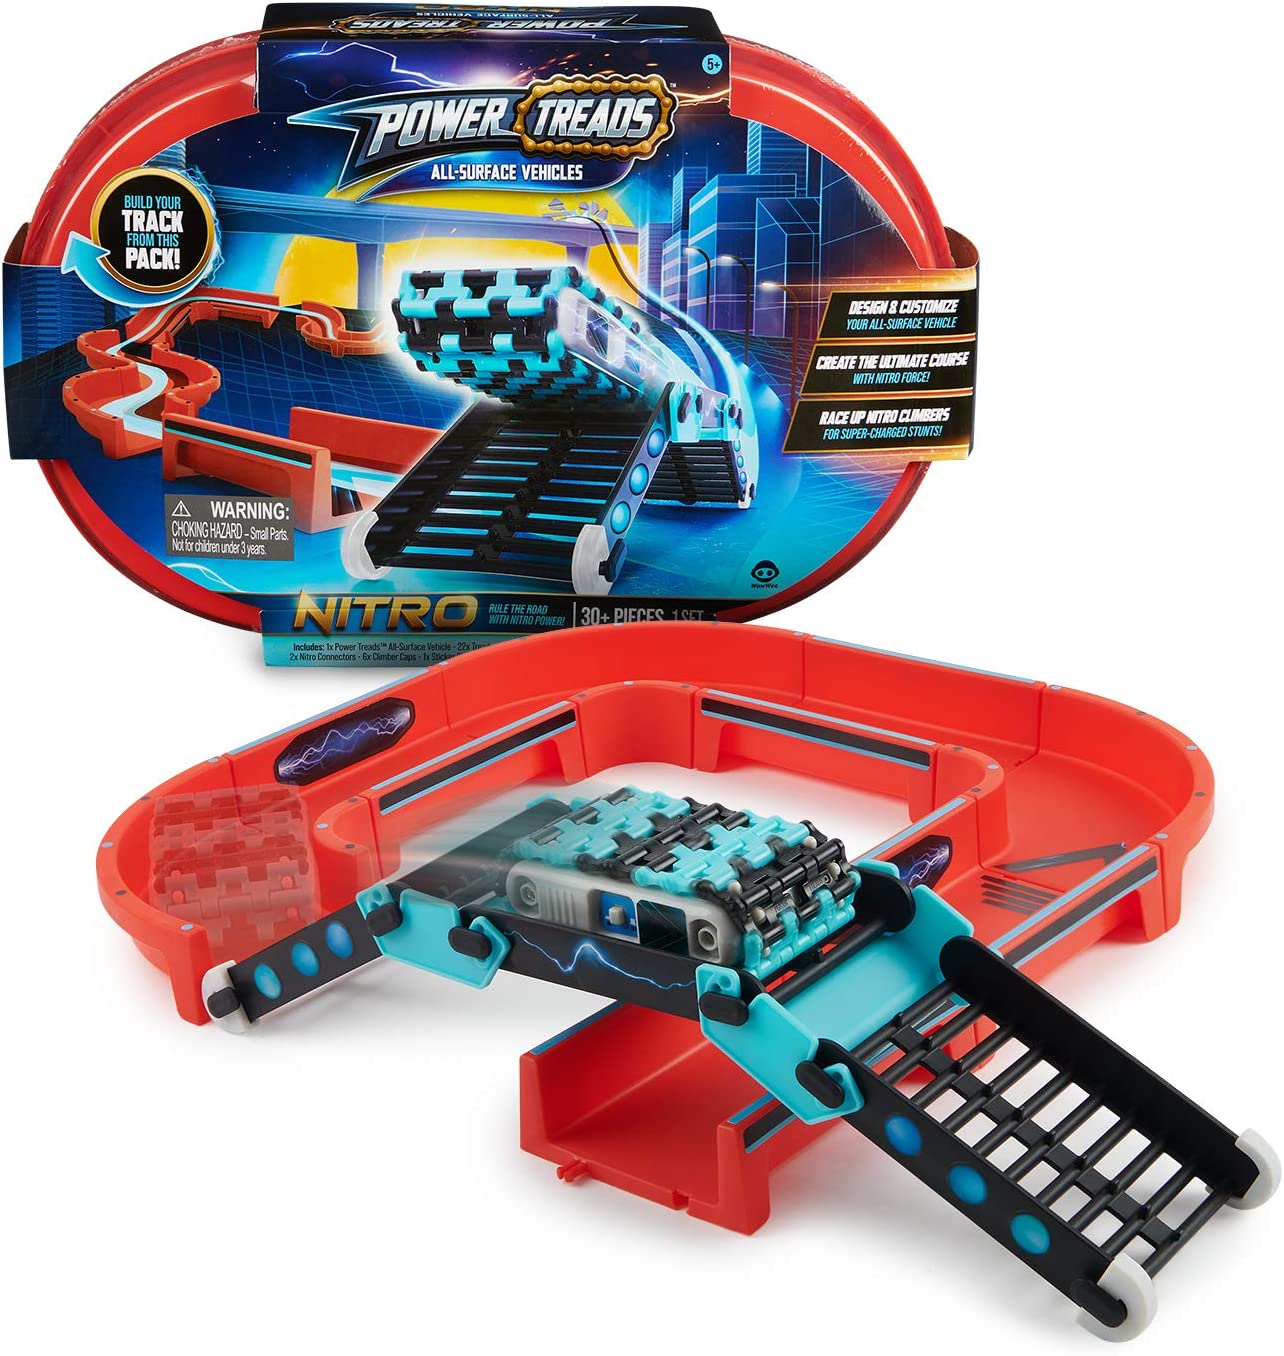 Power Treads - Nitro Stunt Pack - All-Surface Toy Vehicle $8.40 shipped w/ Prime